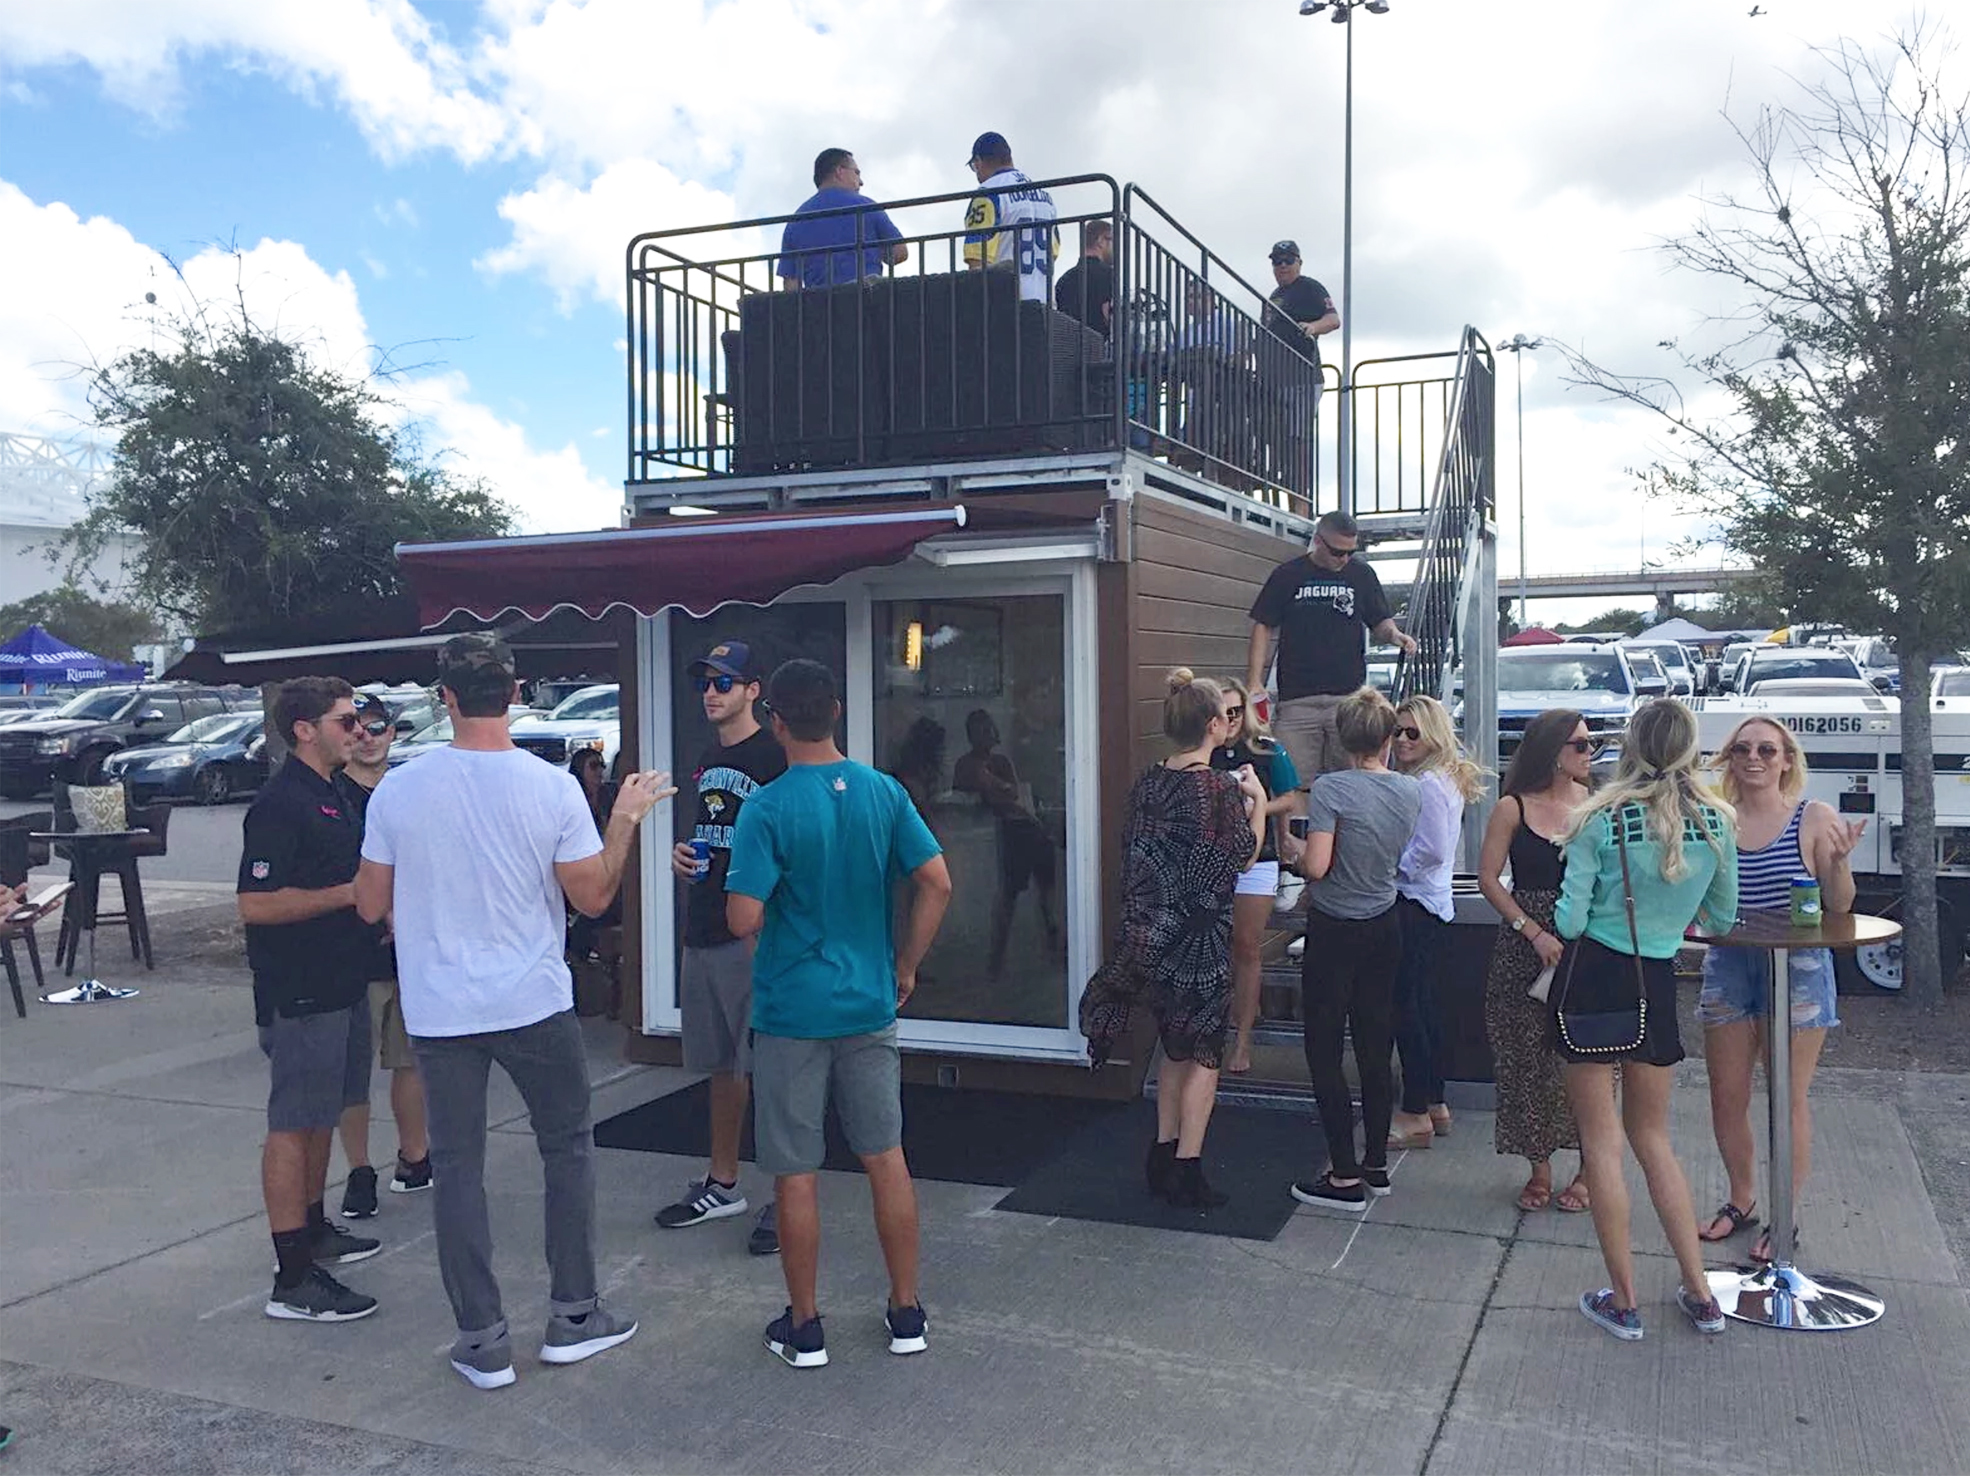 Party Shack brought its concept to Jaguar games last season and is expanding with Tailgate Village.